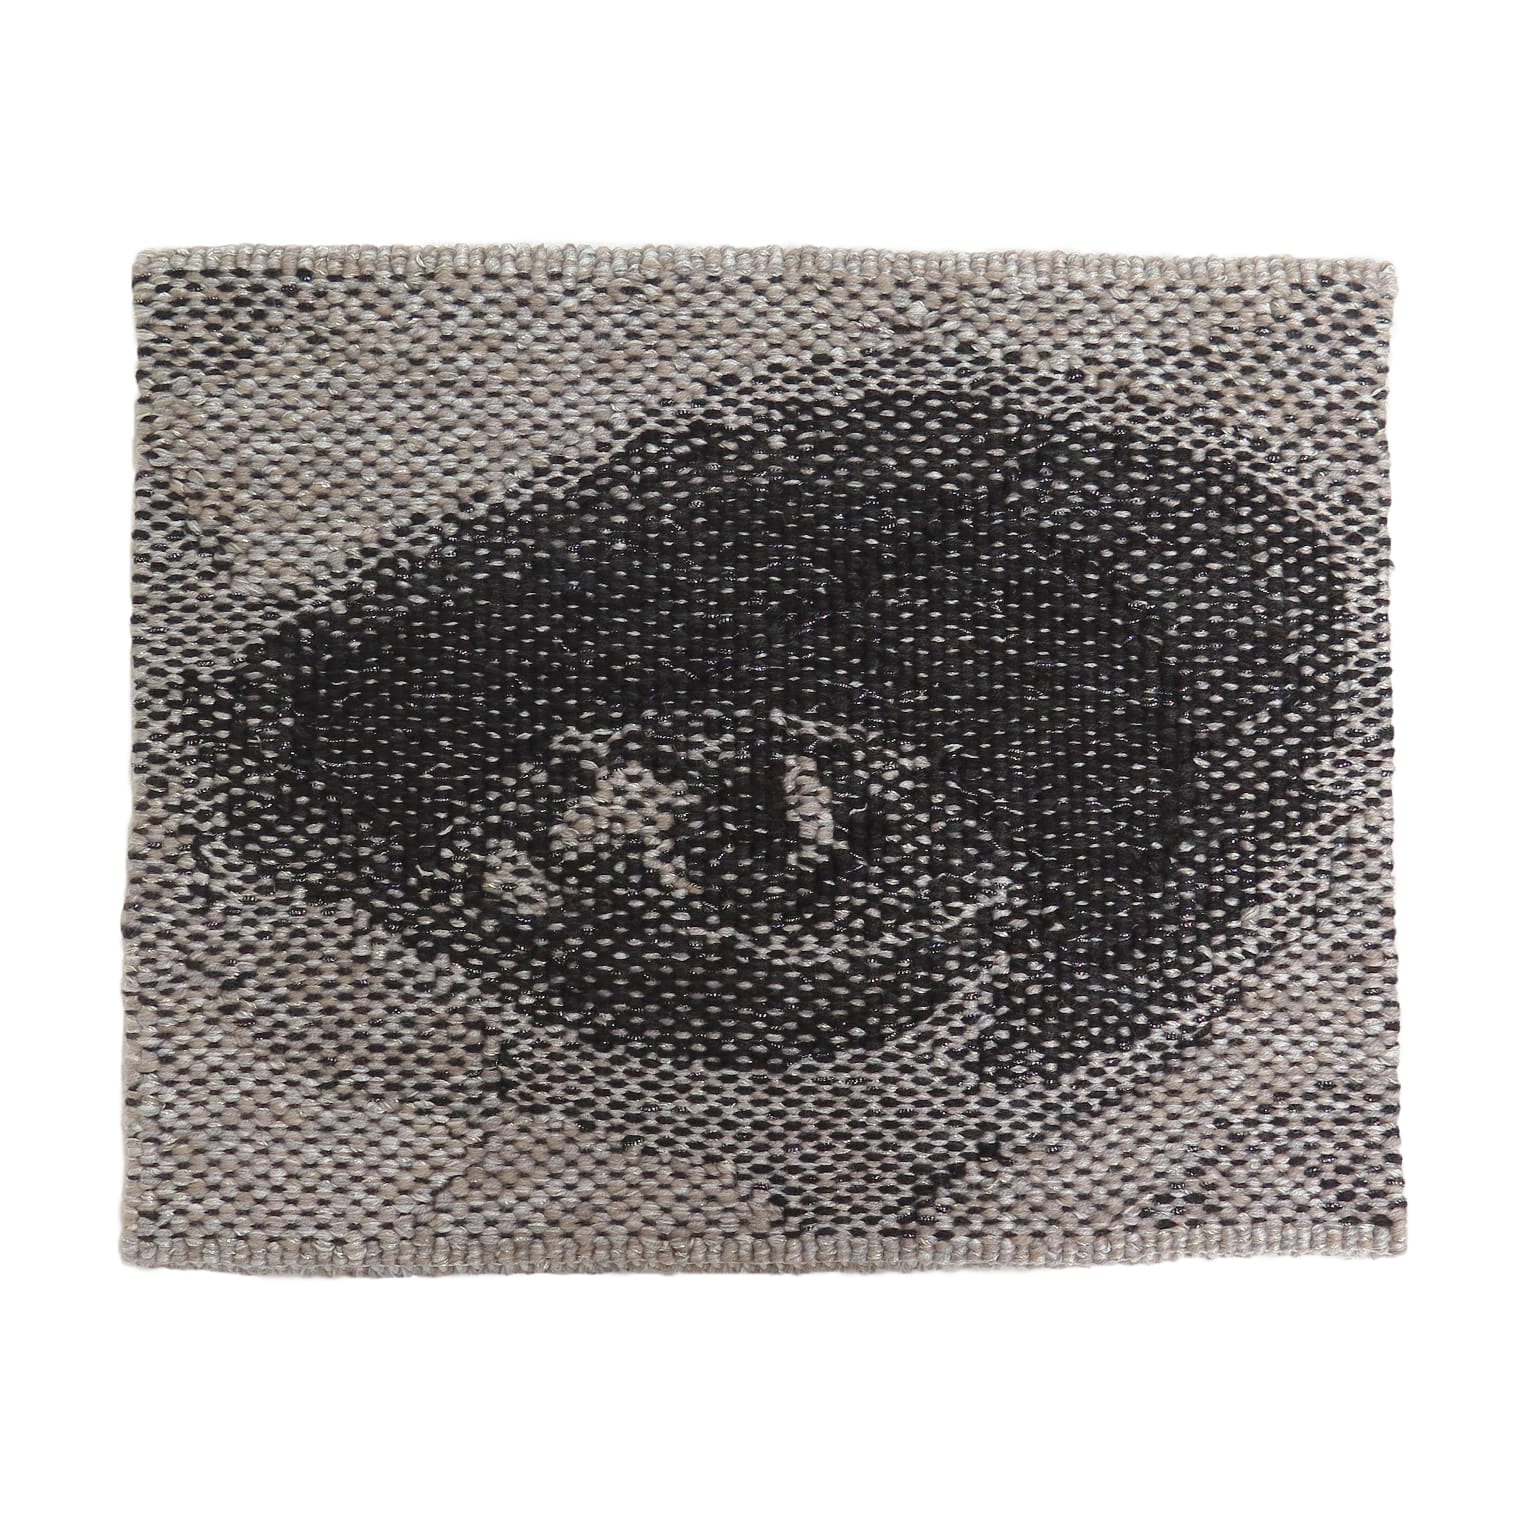 ‘Miili' Edition #7 designed by Brook Andrew in 2019, woven by Chris Cochius, wool, cotton, Lurex, 23.2 x 29.4cm.